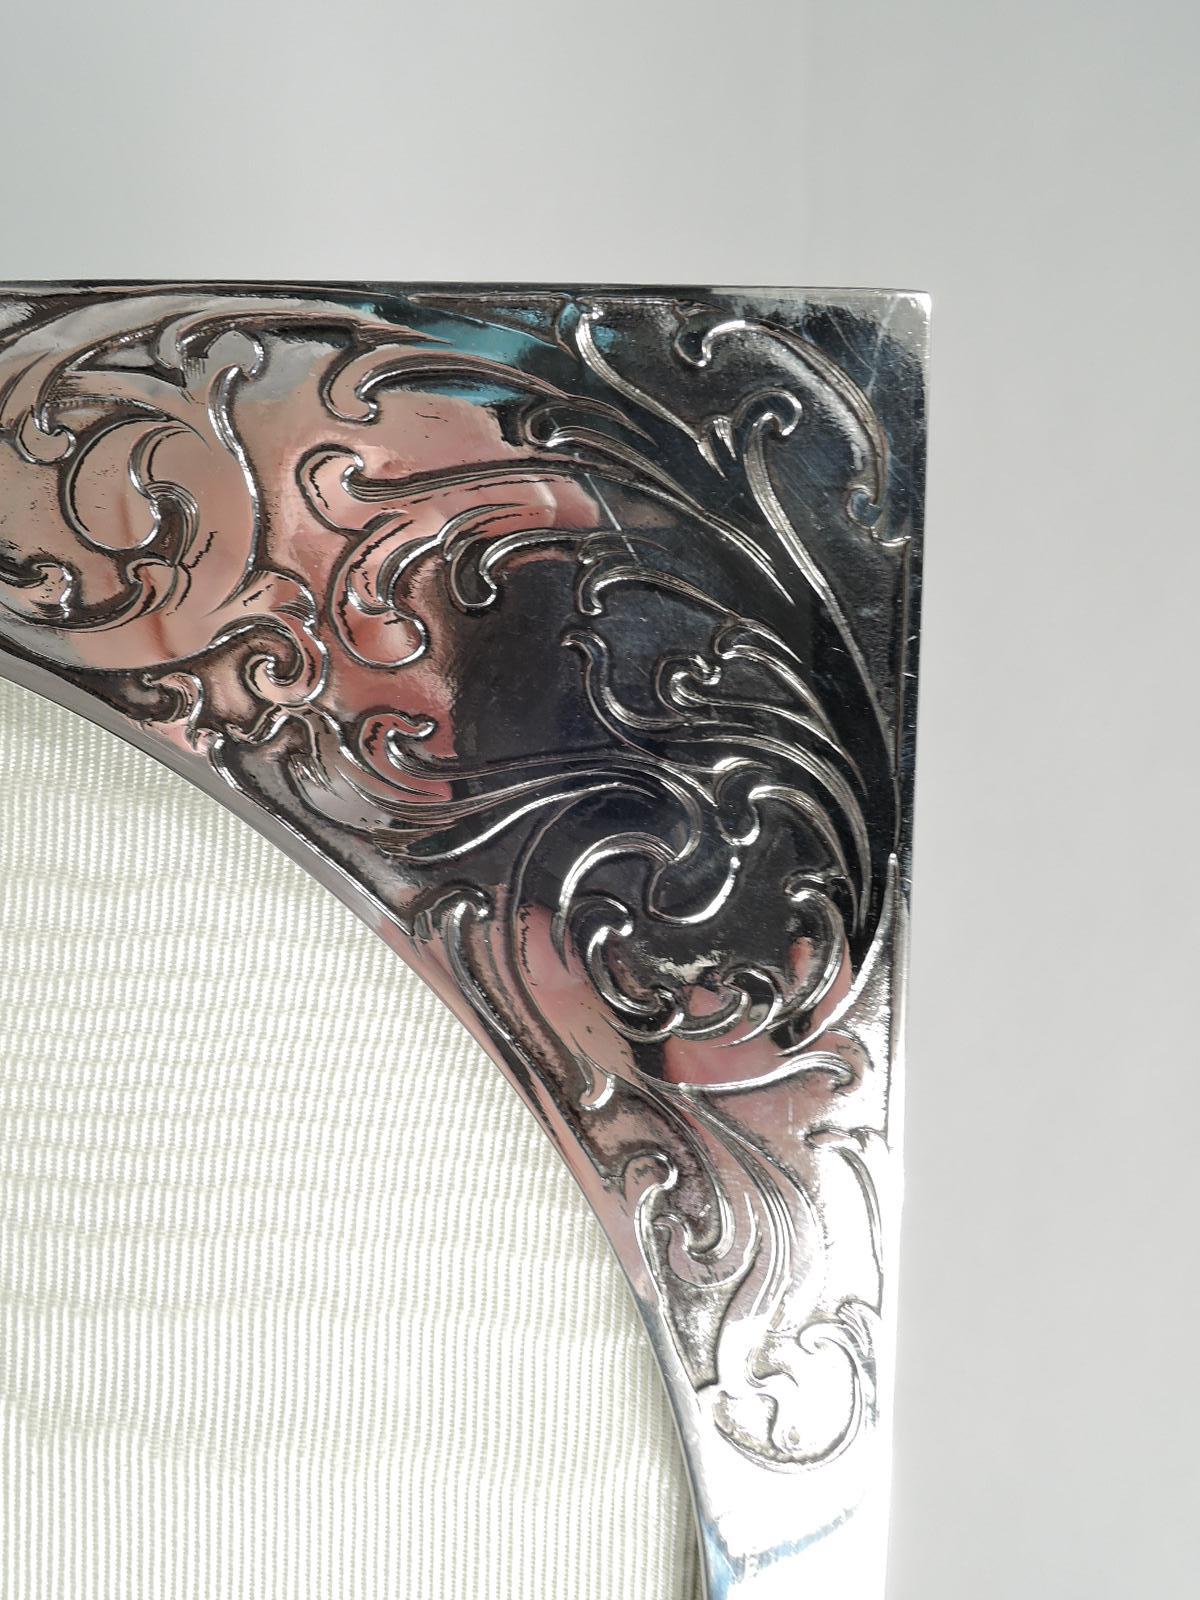 Beautiful turn-of-the-century Art Nouveau sterling silver frame. Made by Mauser Mfg. Co. in New York. Oval window in rectangular surround. Lush and exuberant leafing scrolls acid-etched on front. Sides plain. With glass, silk lining, and velvet back